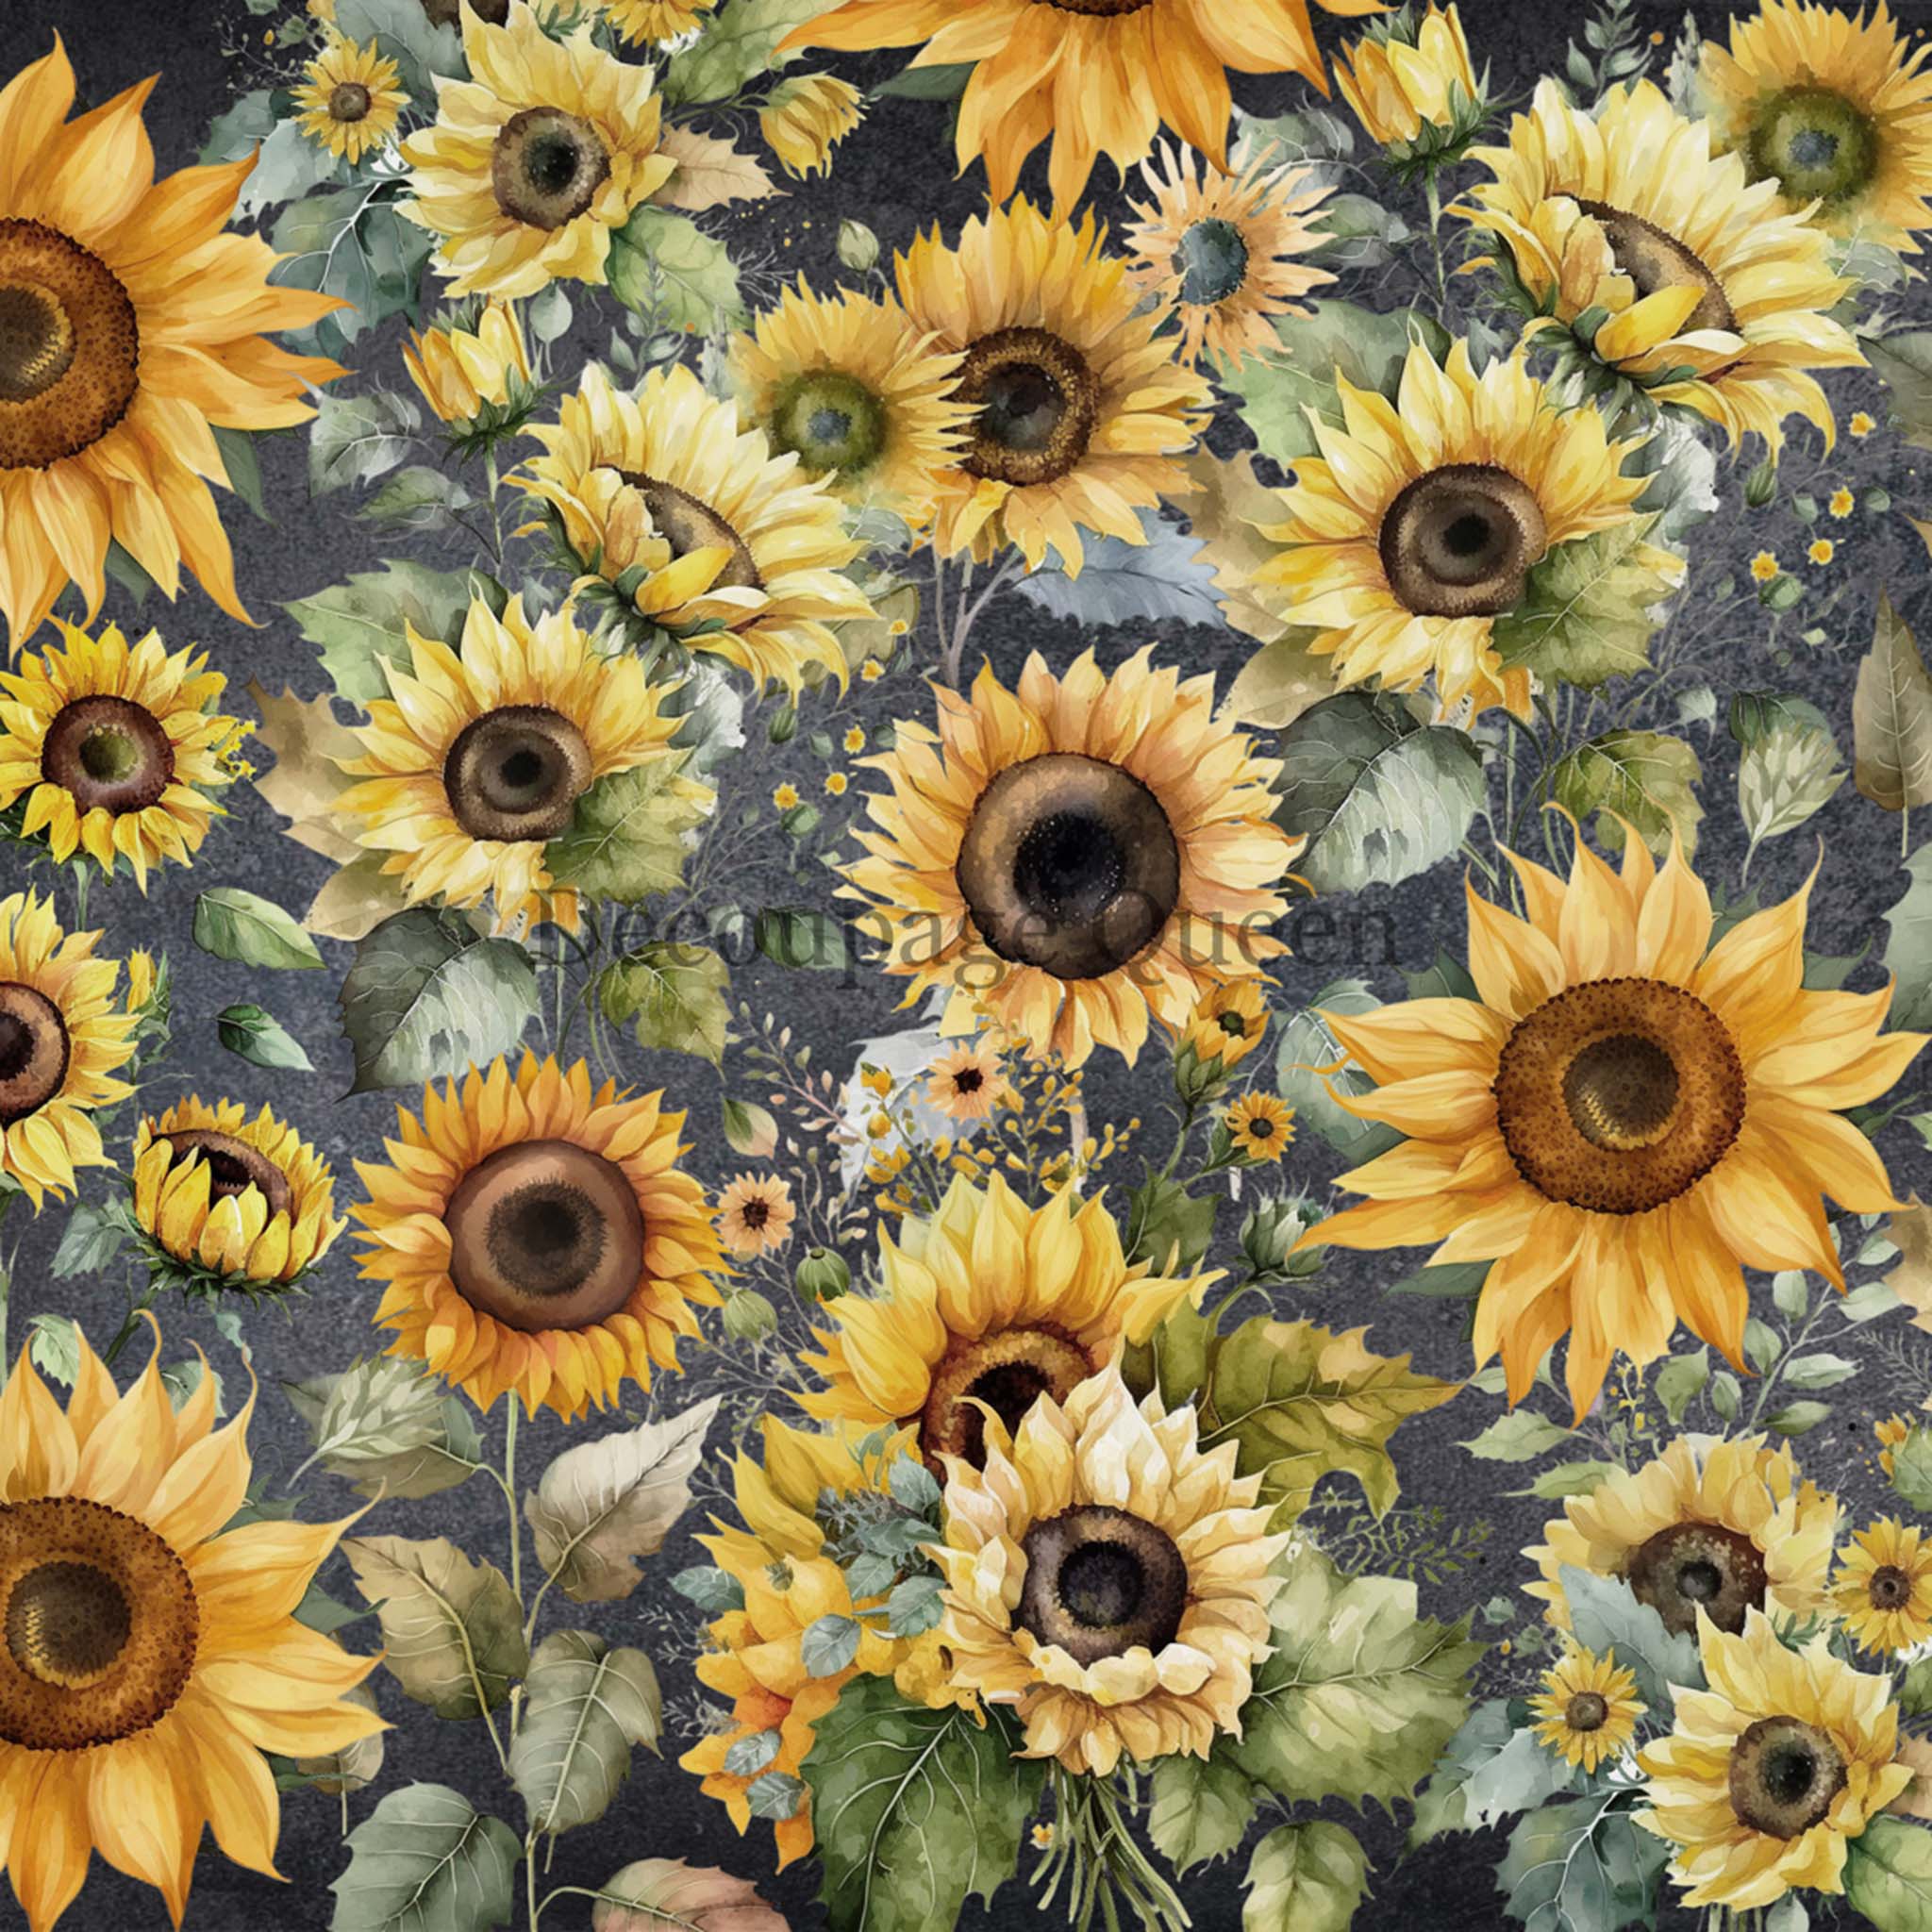 A2 rice paper design featuring cheerful sunflowers bursting across a grey background.